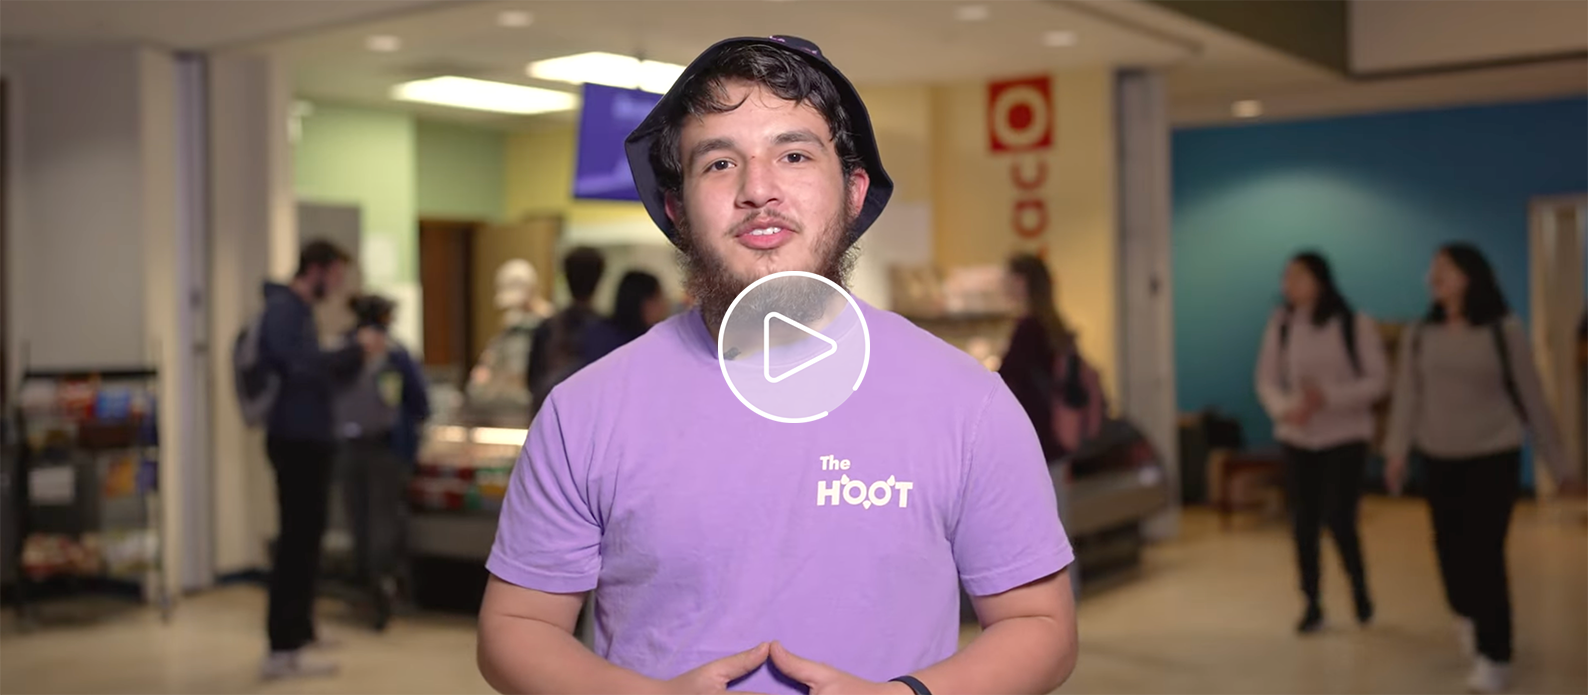 Male student wearing lilac T-Shirt with the words "The Hoot" written on his upper left chest.